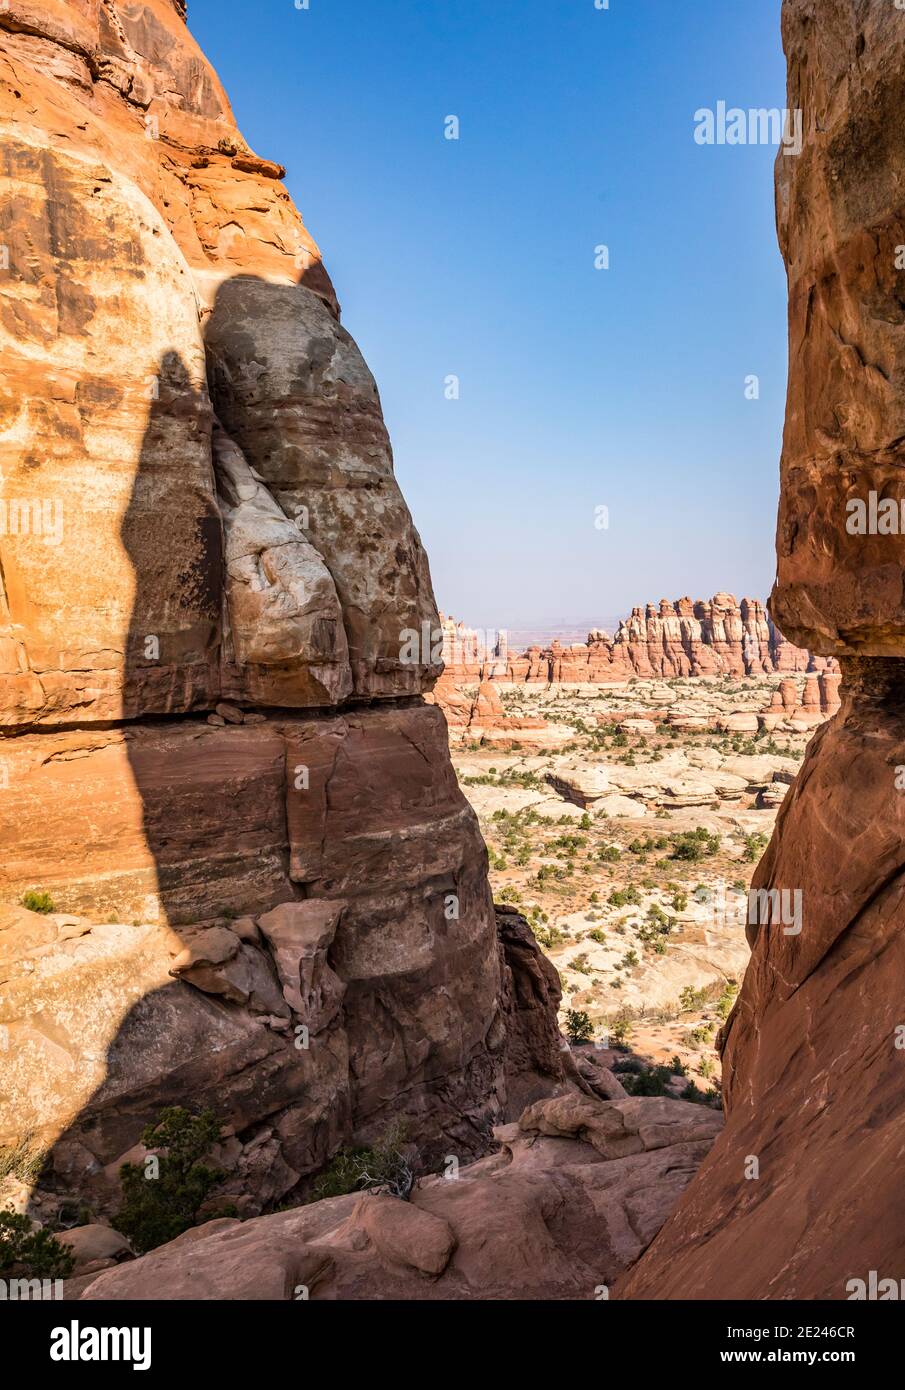 Vicino a Chesler Parkin the Needles District's Chesler Park Trail, Canyonlands National Park, Utah, USA. Foto Stock